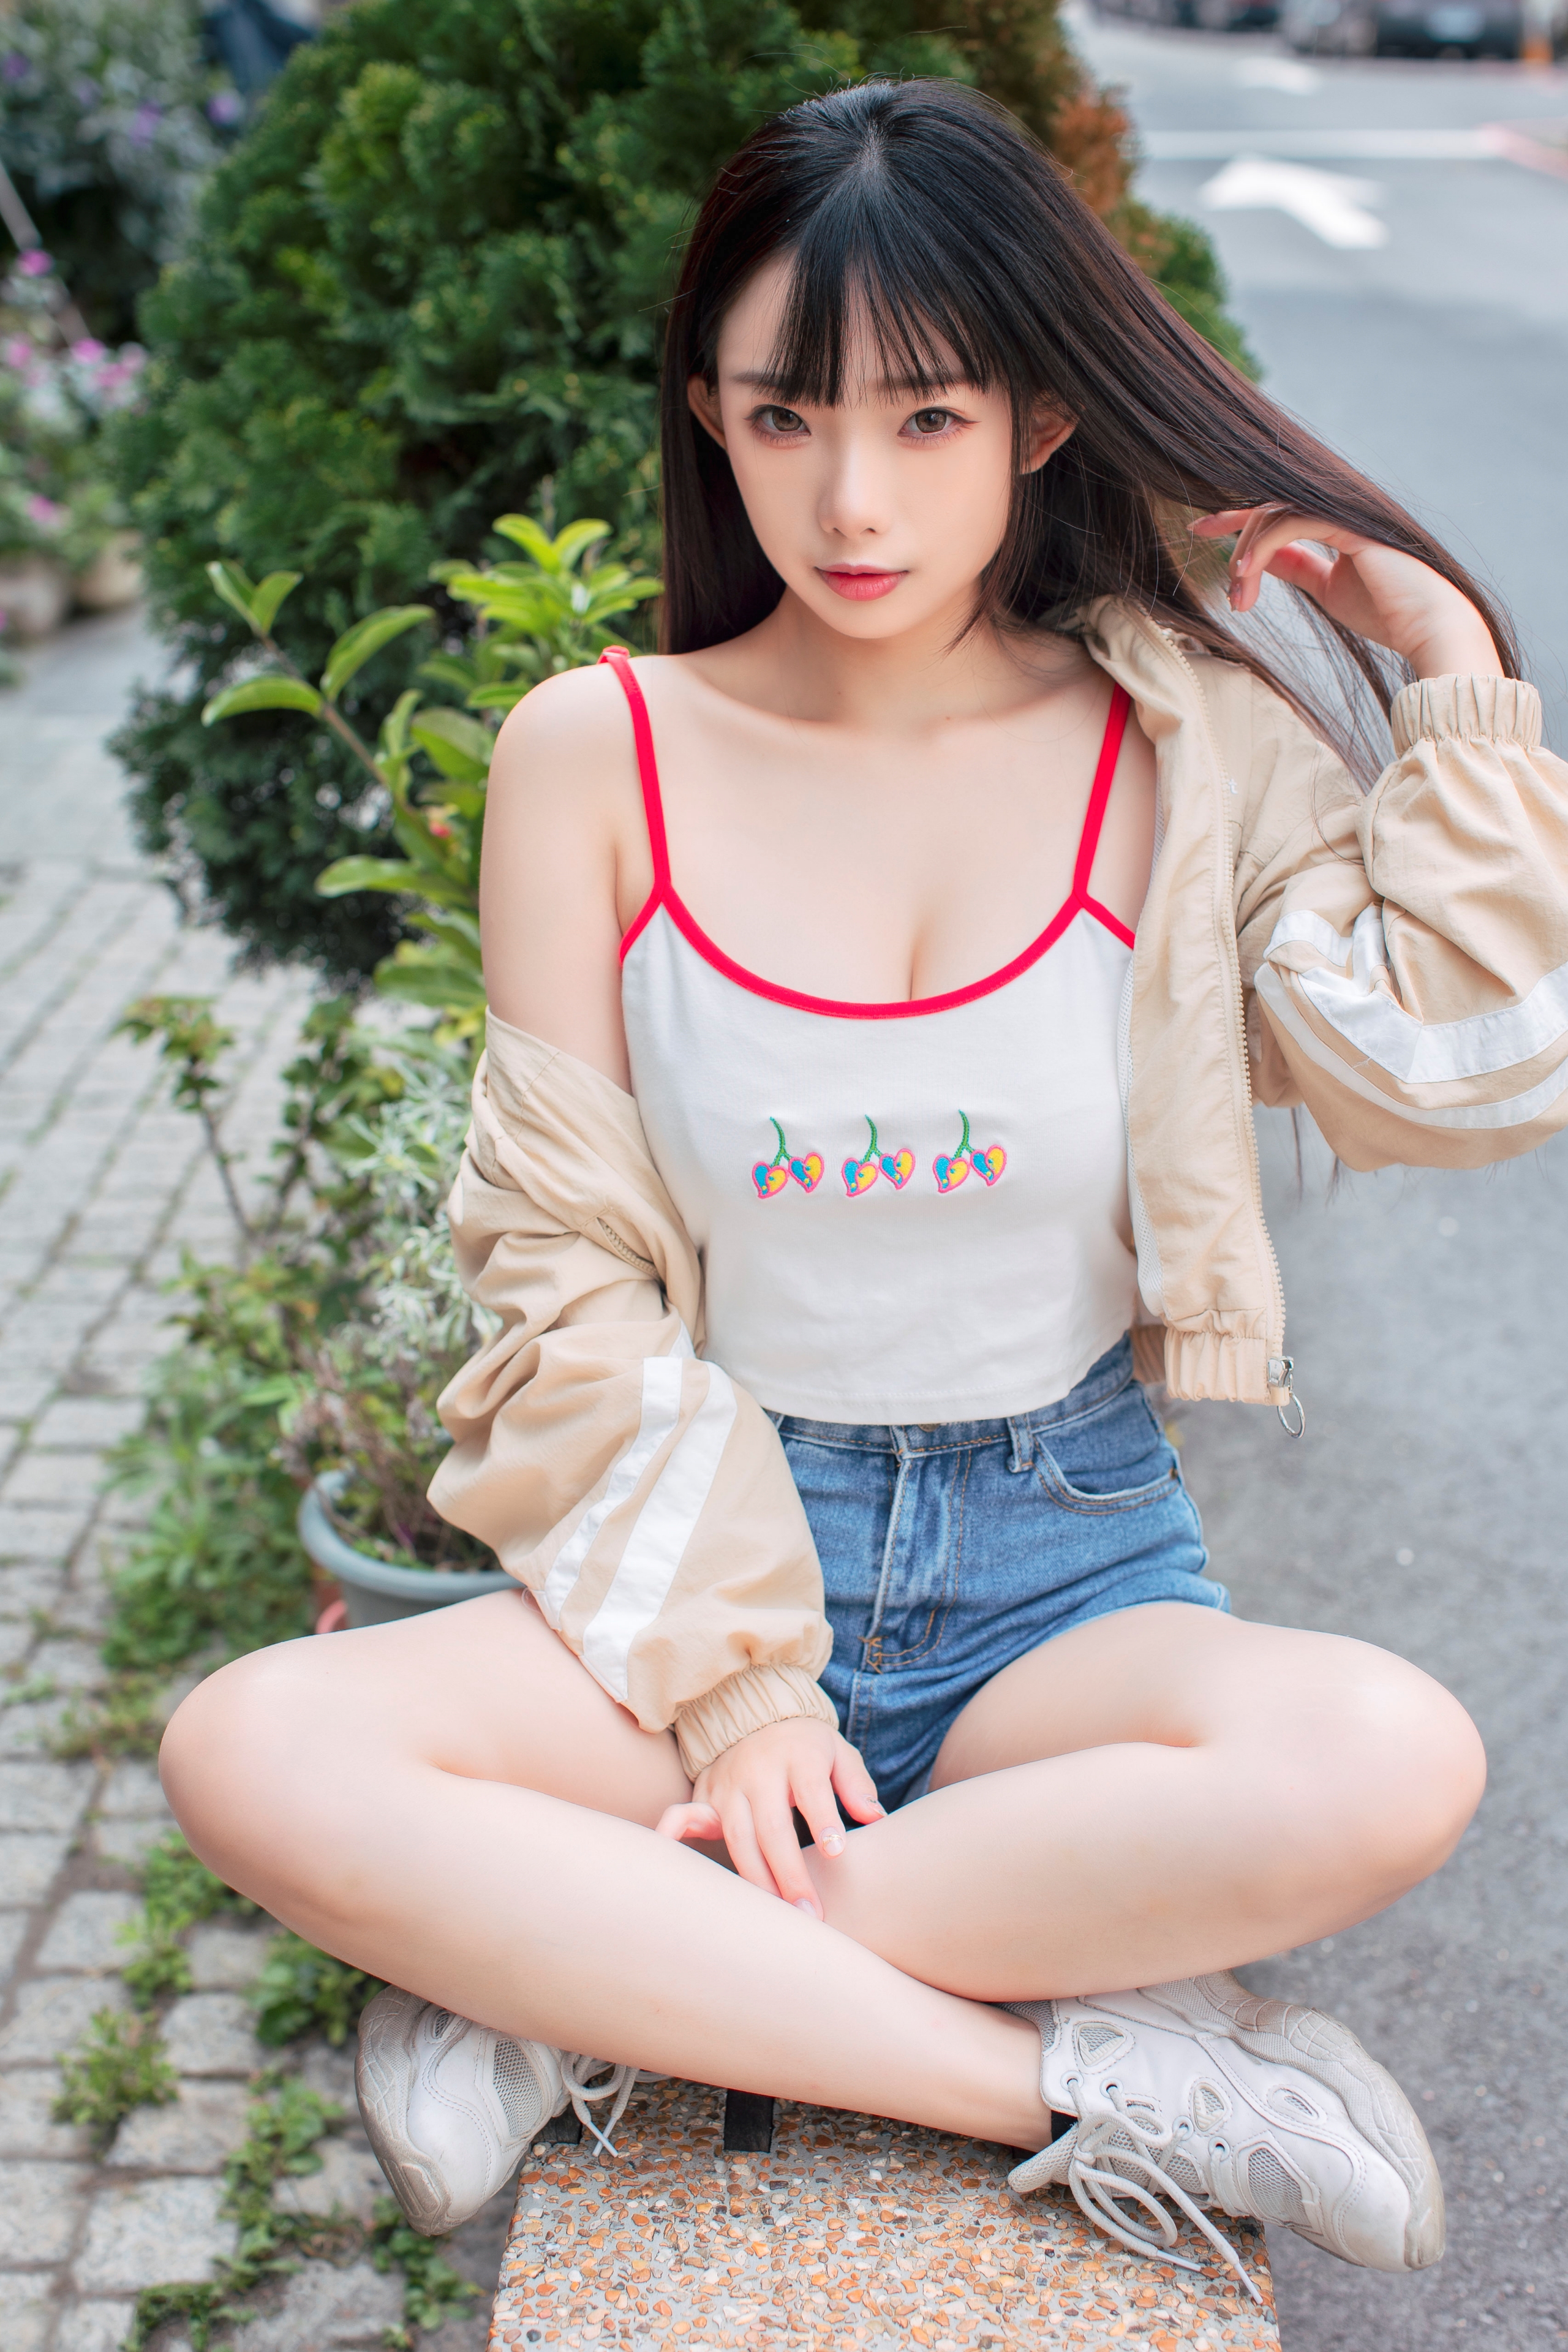 People 2560x3840 Ning Shioulin women model Asian brunette bangs looking at viewer portrait display cleavage white tops jean shorts sitting legs crossed sneakers outdoors women outdoors